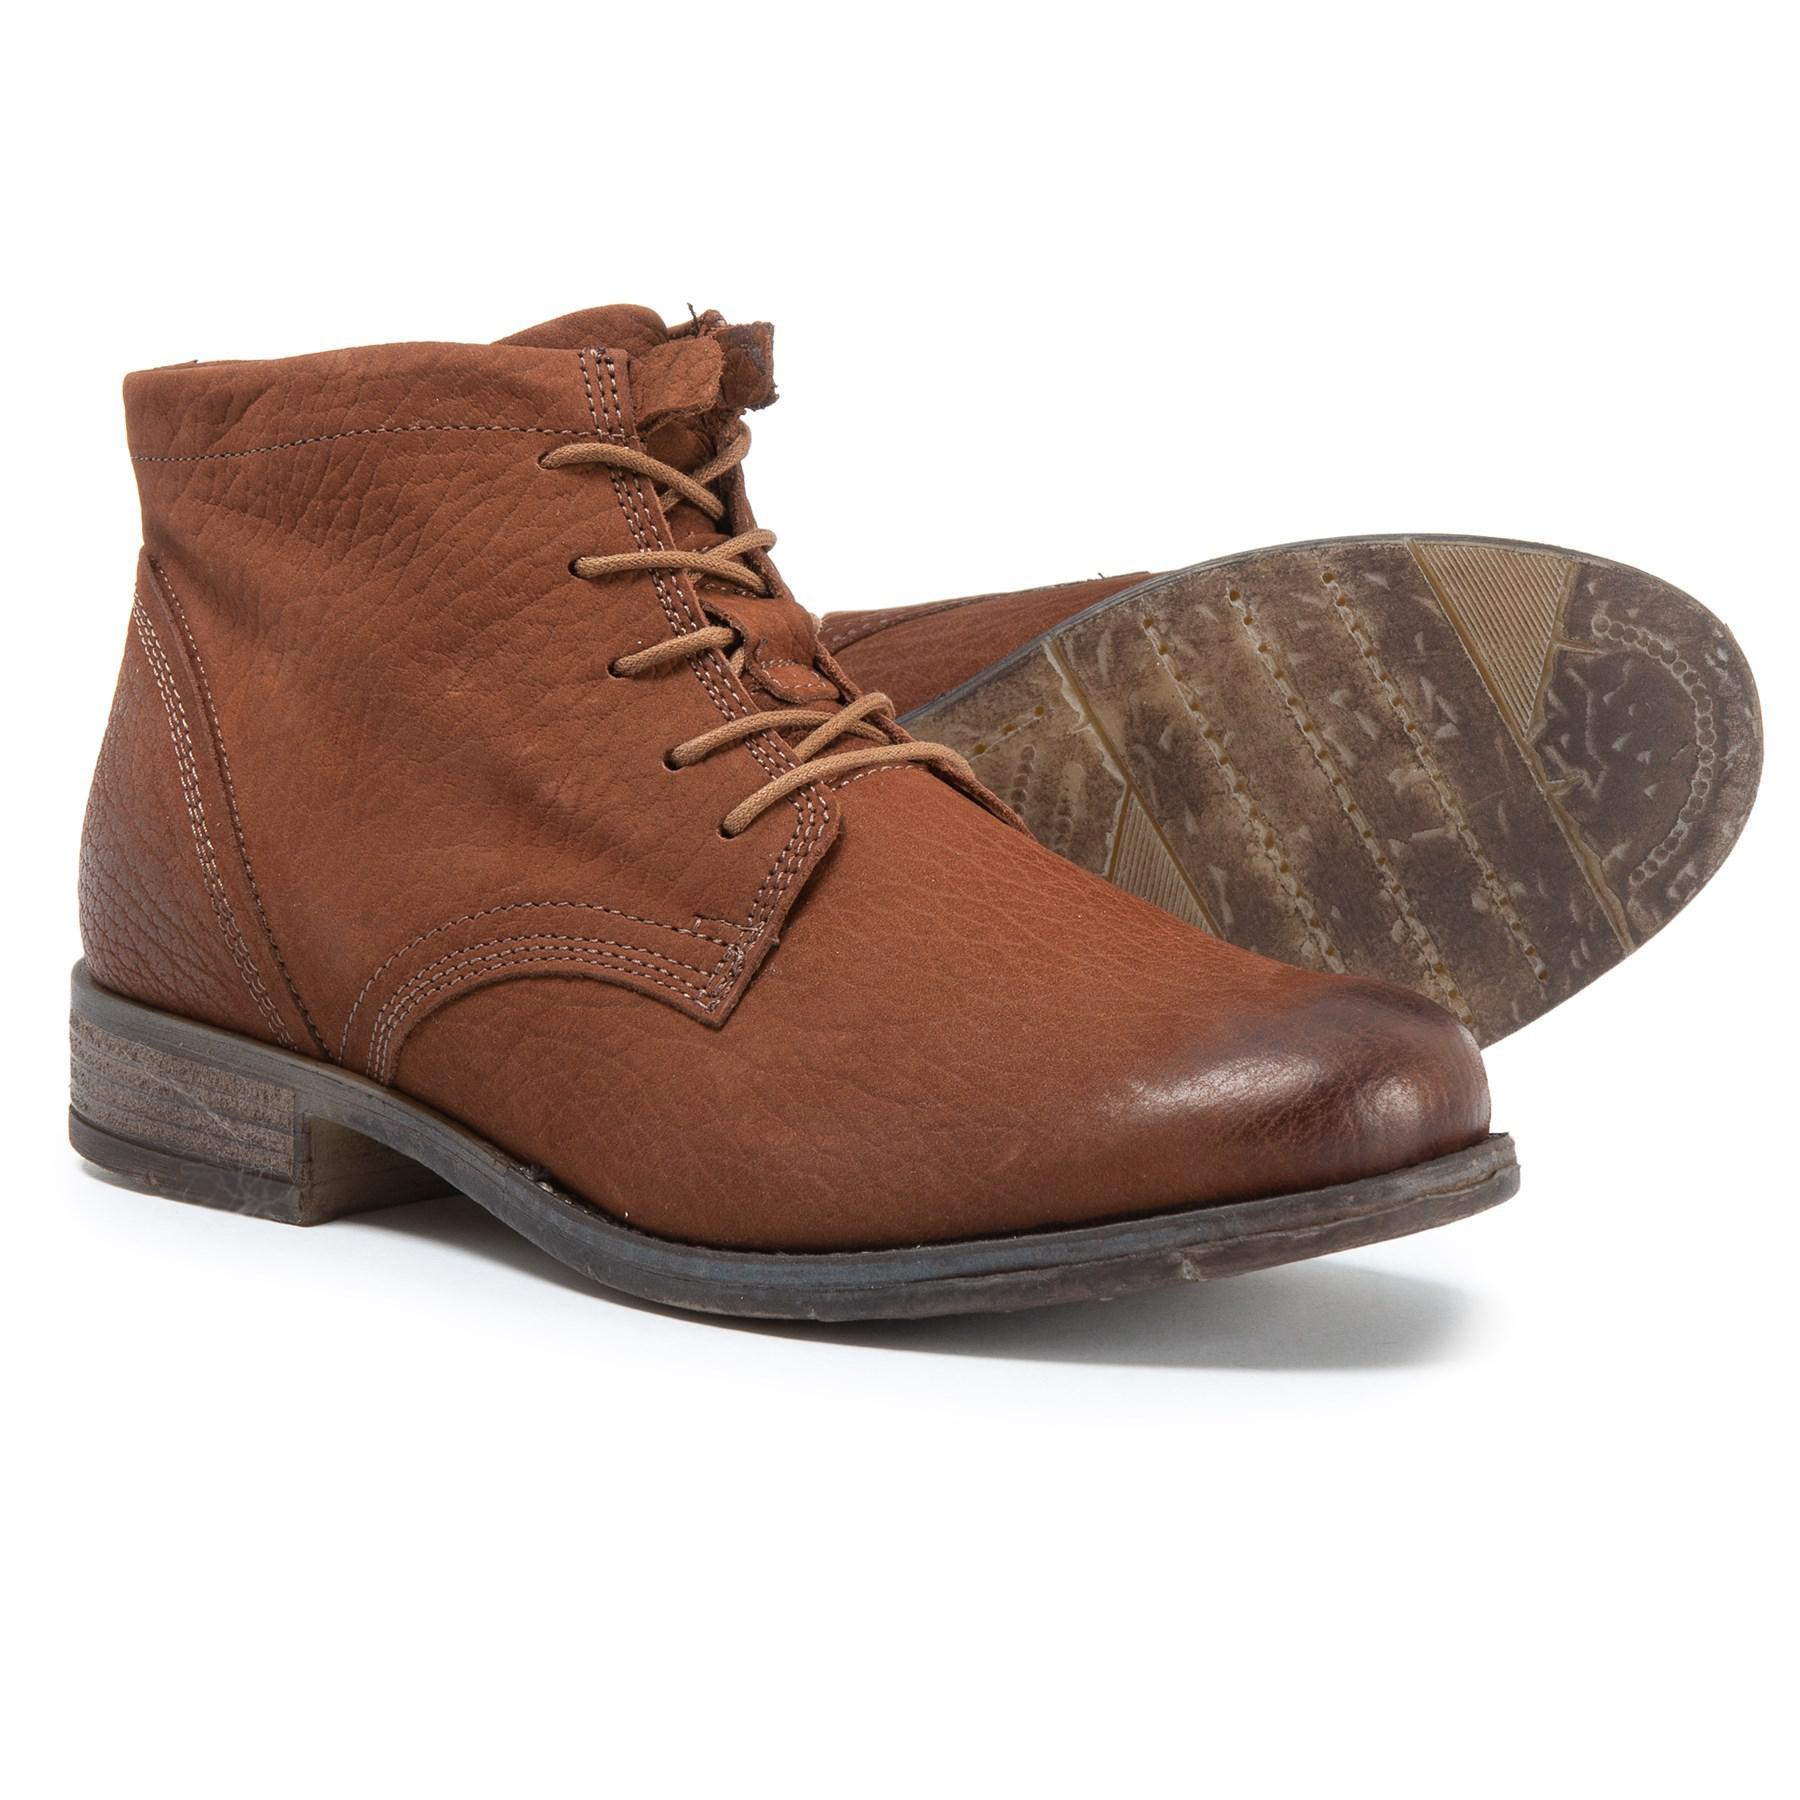 Josef Seibel Leather Sienna 03 Boots in 